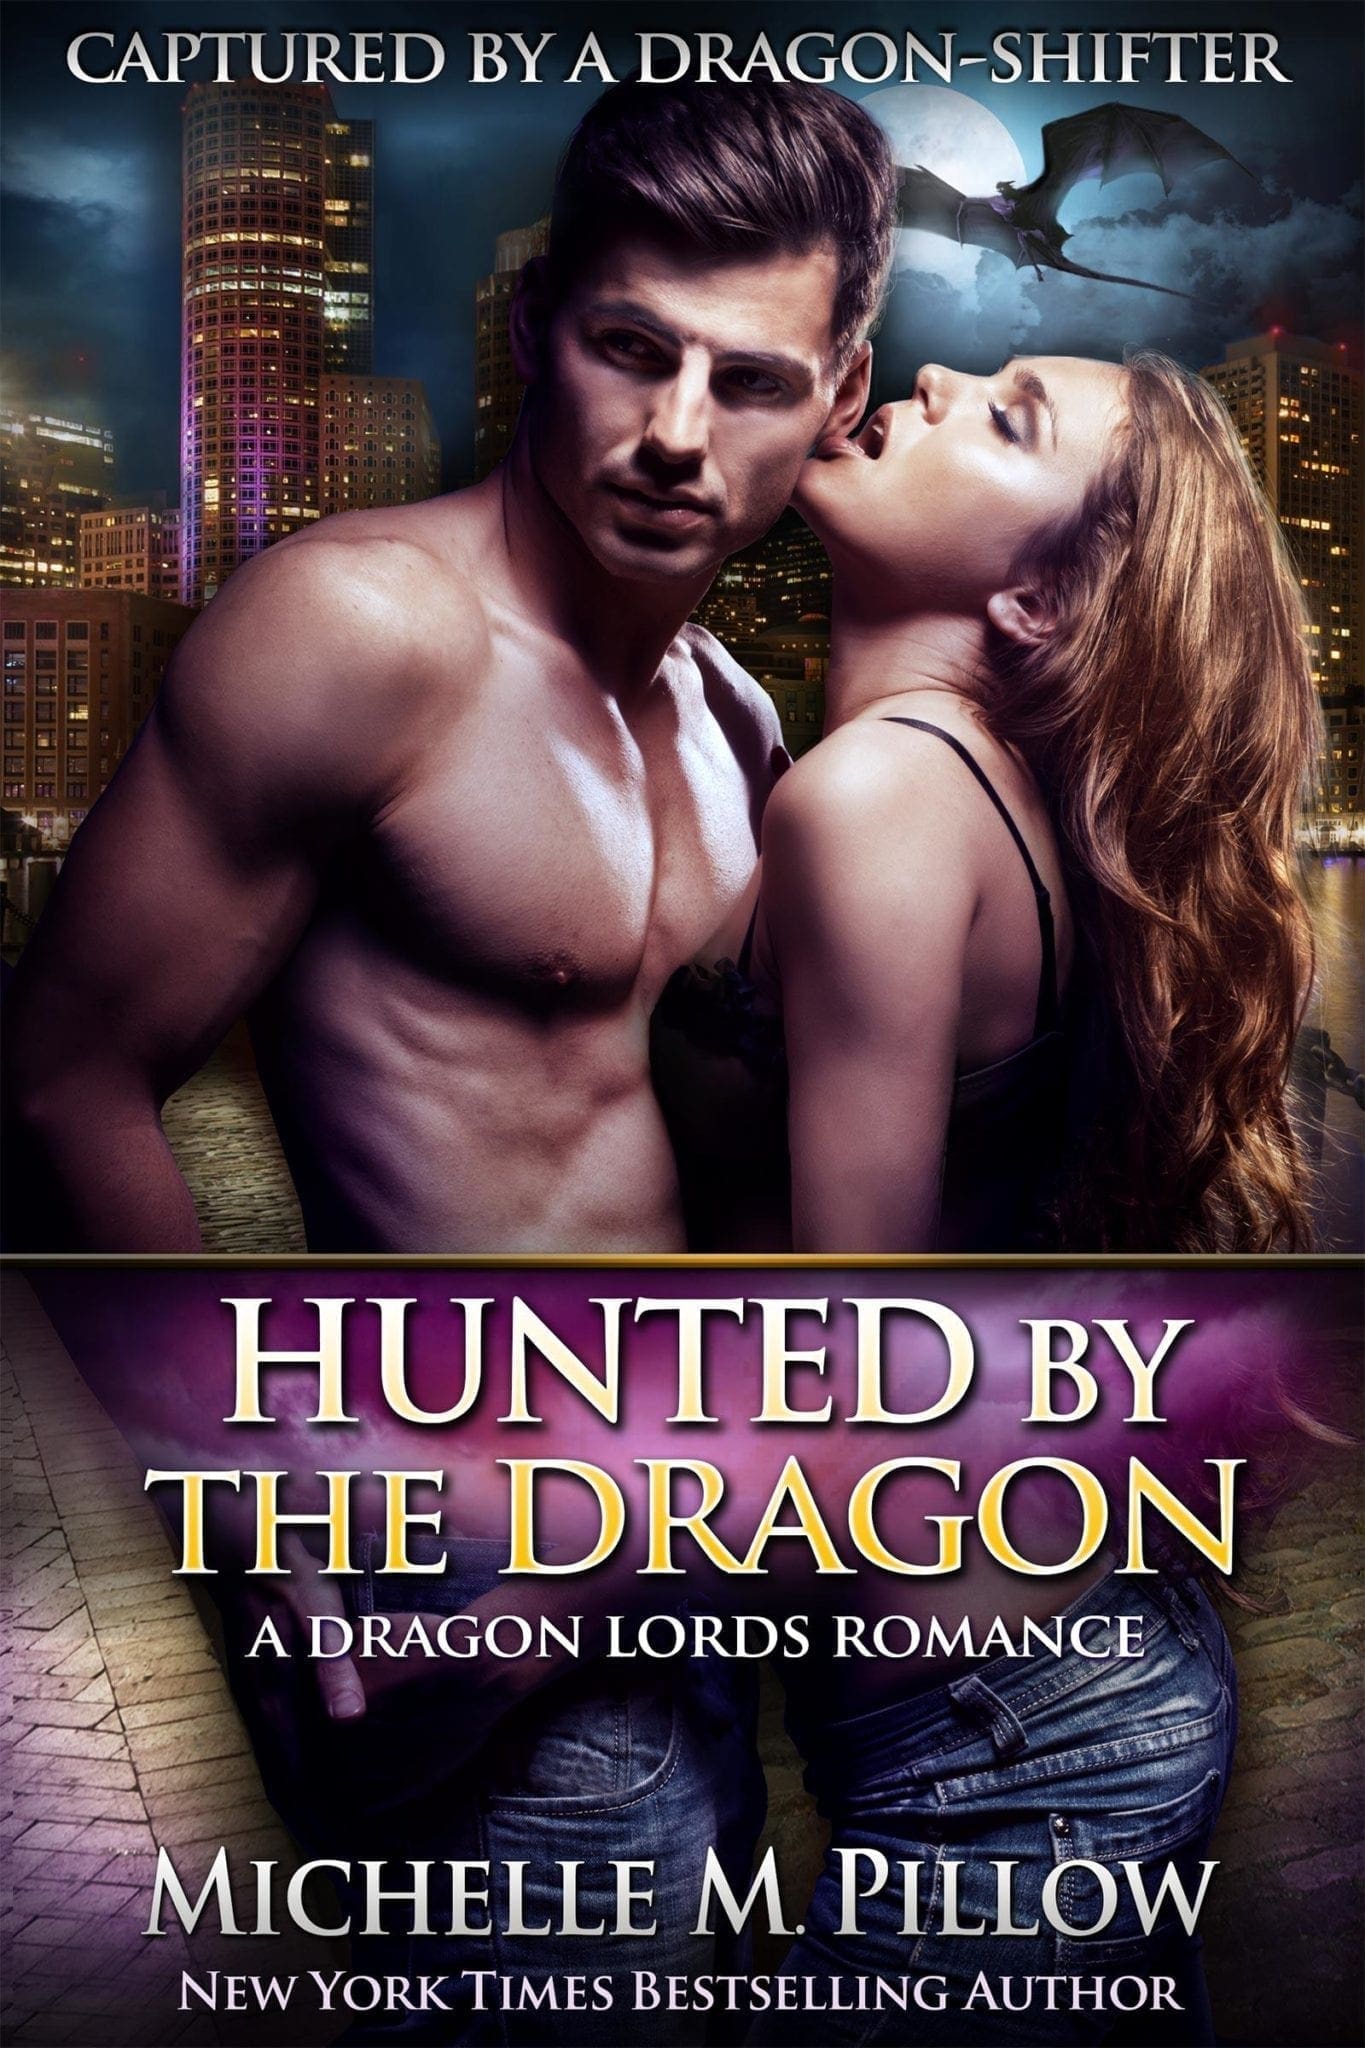 Hunted by the Dragon Book Cover